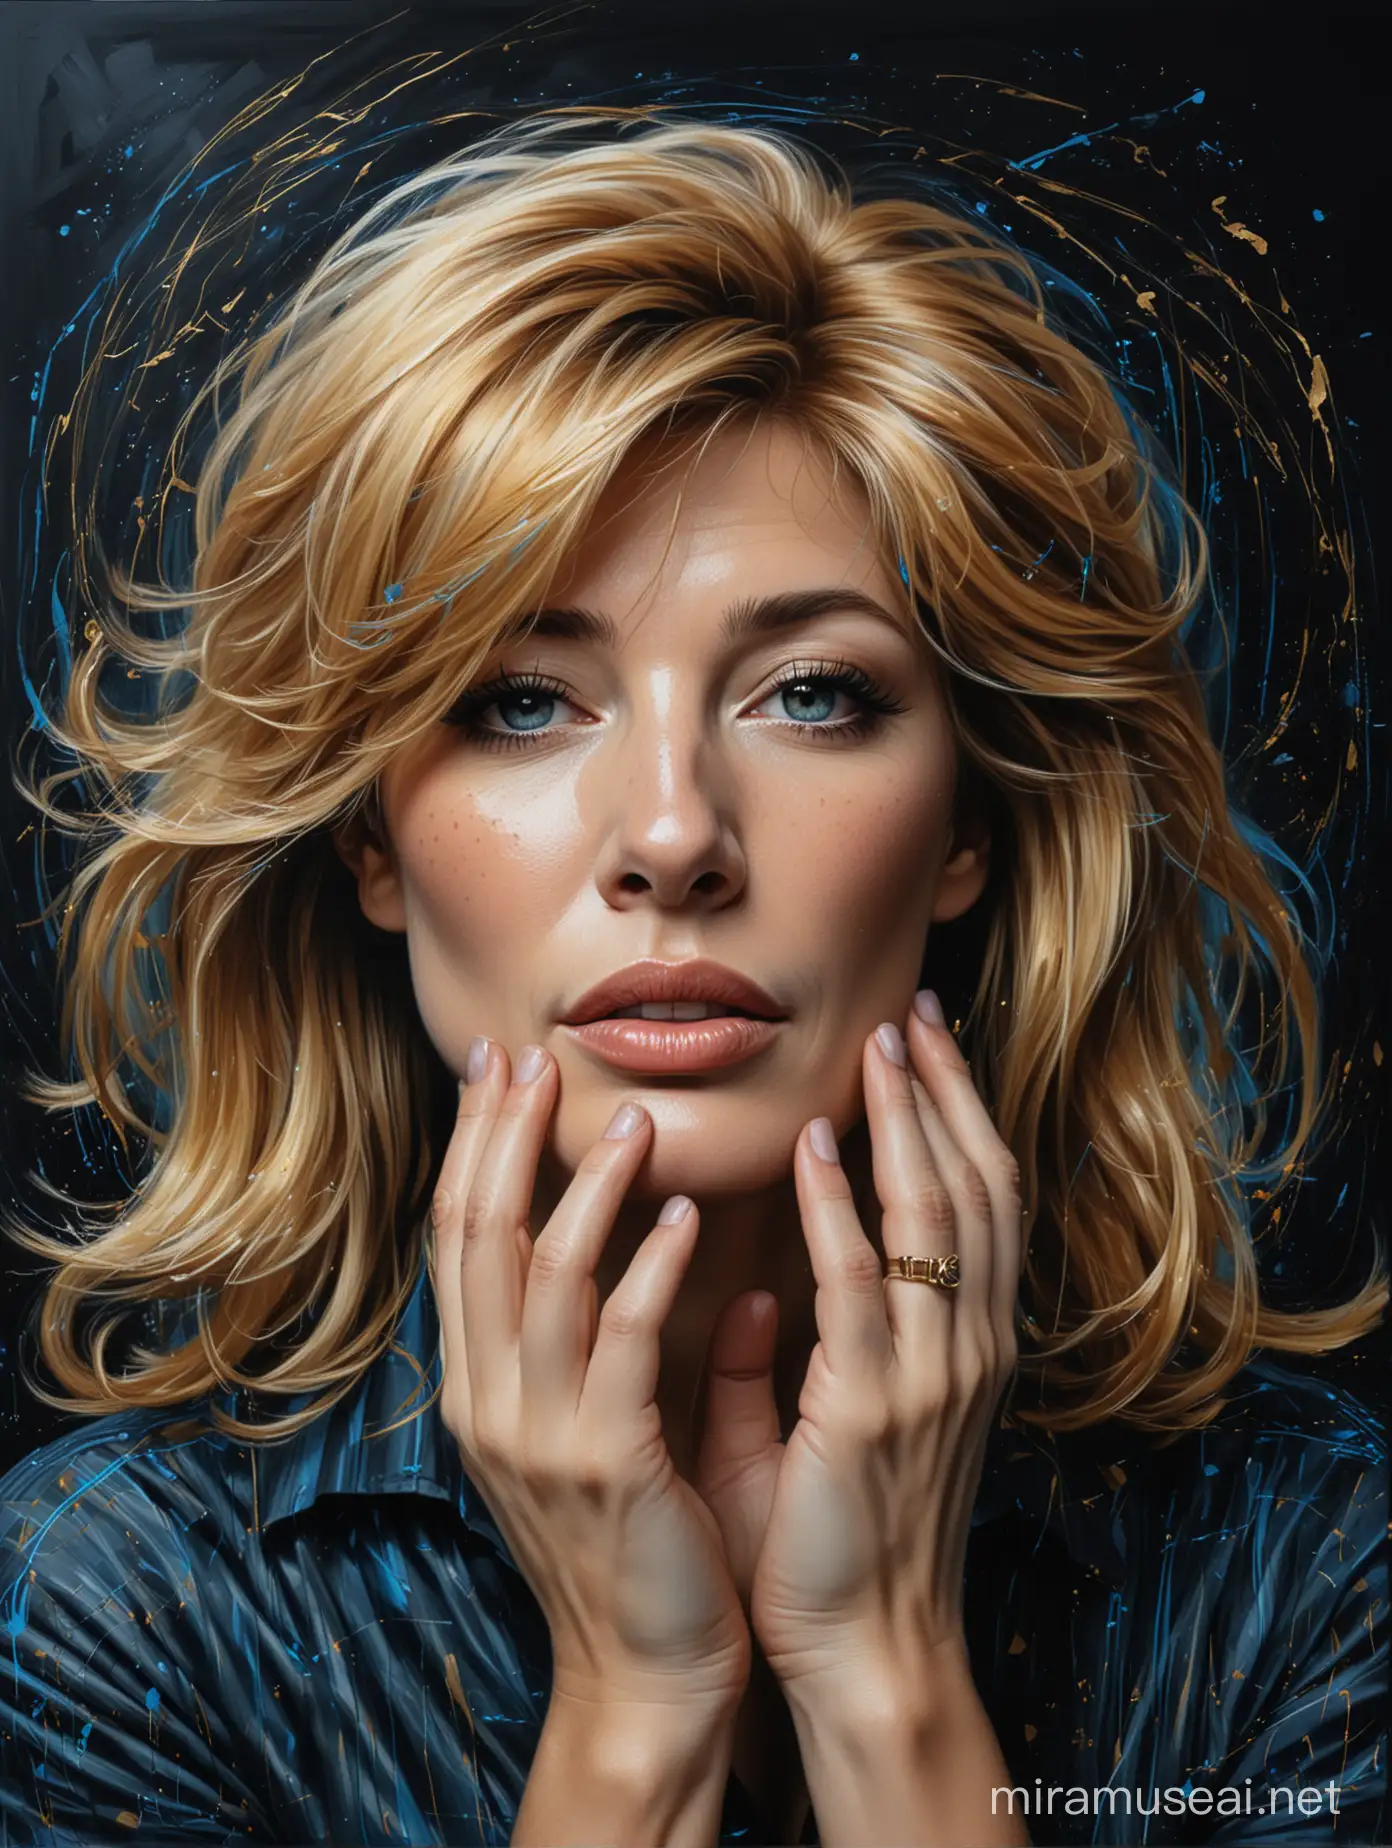 Monica Vitti. She has her hands near her face, The background is a black space with golden and blue lines swirling around the avatar., Oil painting, New Classic style